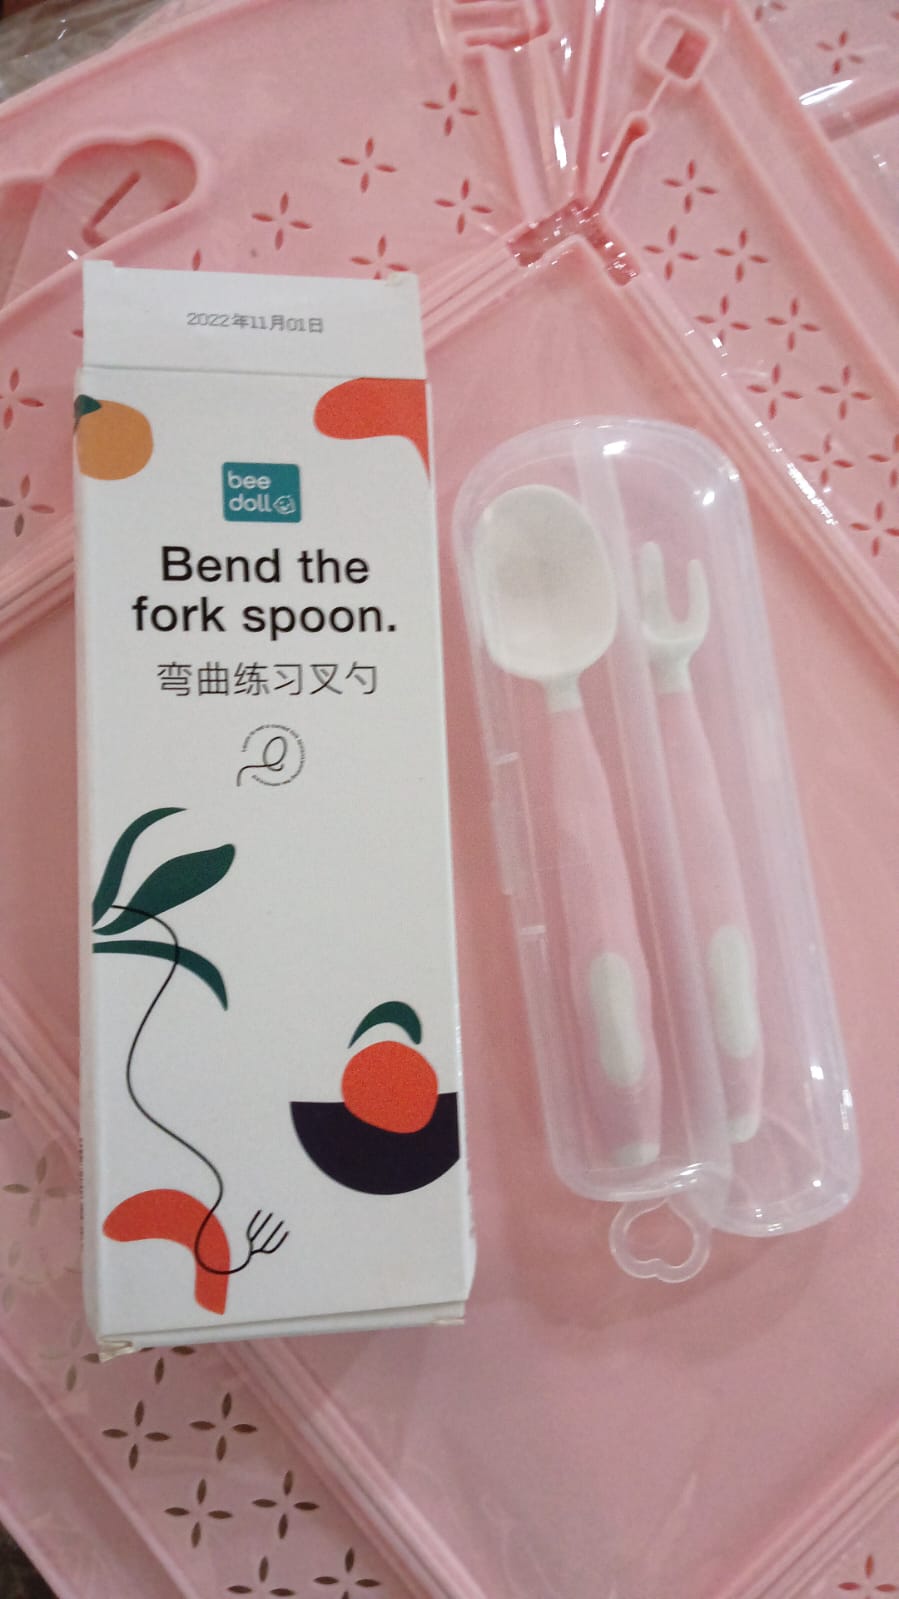 Silicone Bendable Kids Feeding Spoons And Forks, Toddler Utensils with Travel case, Baby Spoon and Fork Set for self-Feeding Learning Bendable Handle for Kid Children Toddlers (2 Pc Set)